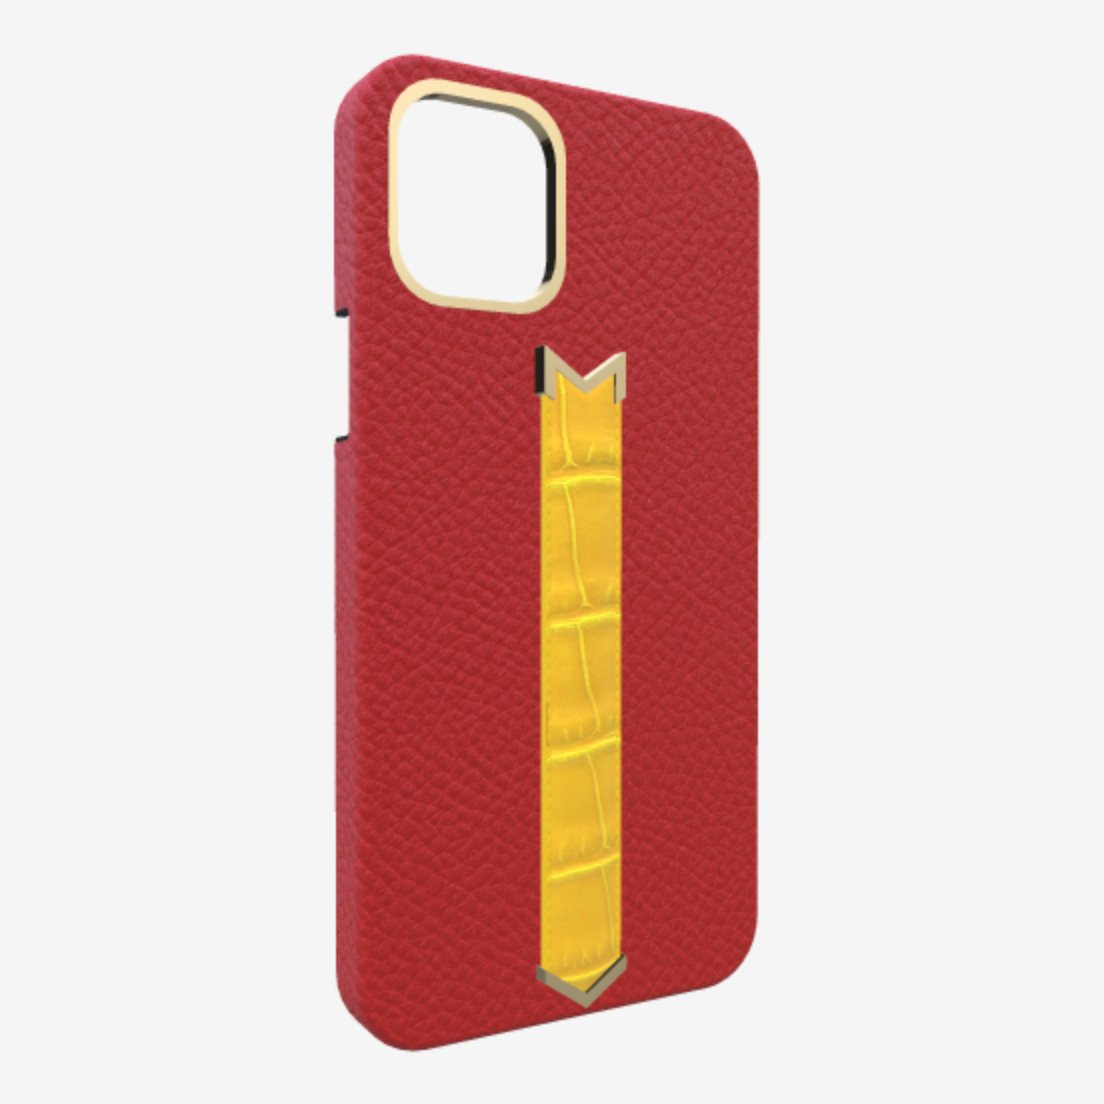 Gold Finger Strap Case for iPhone 13 Pro Max in Genuine Calfskin and Alligator Glamour Red Summer Yellow 